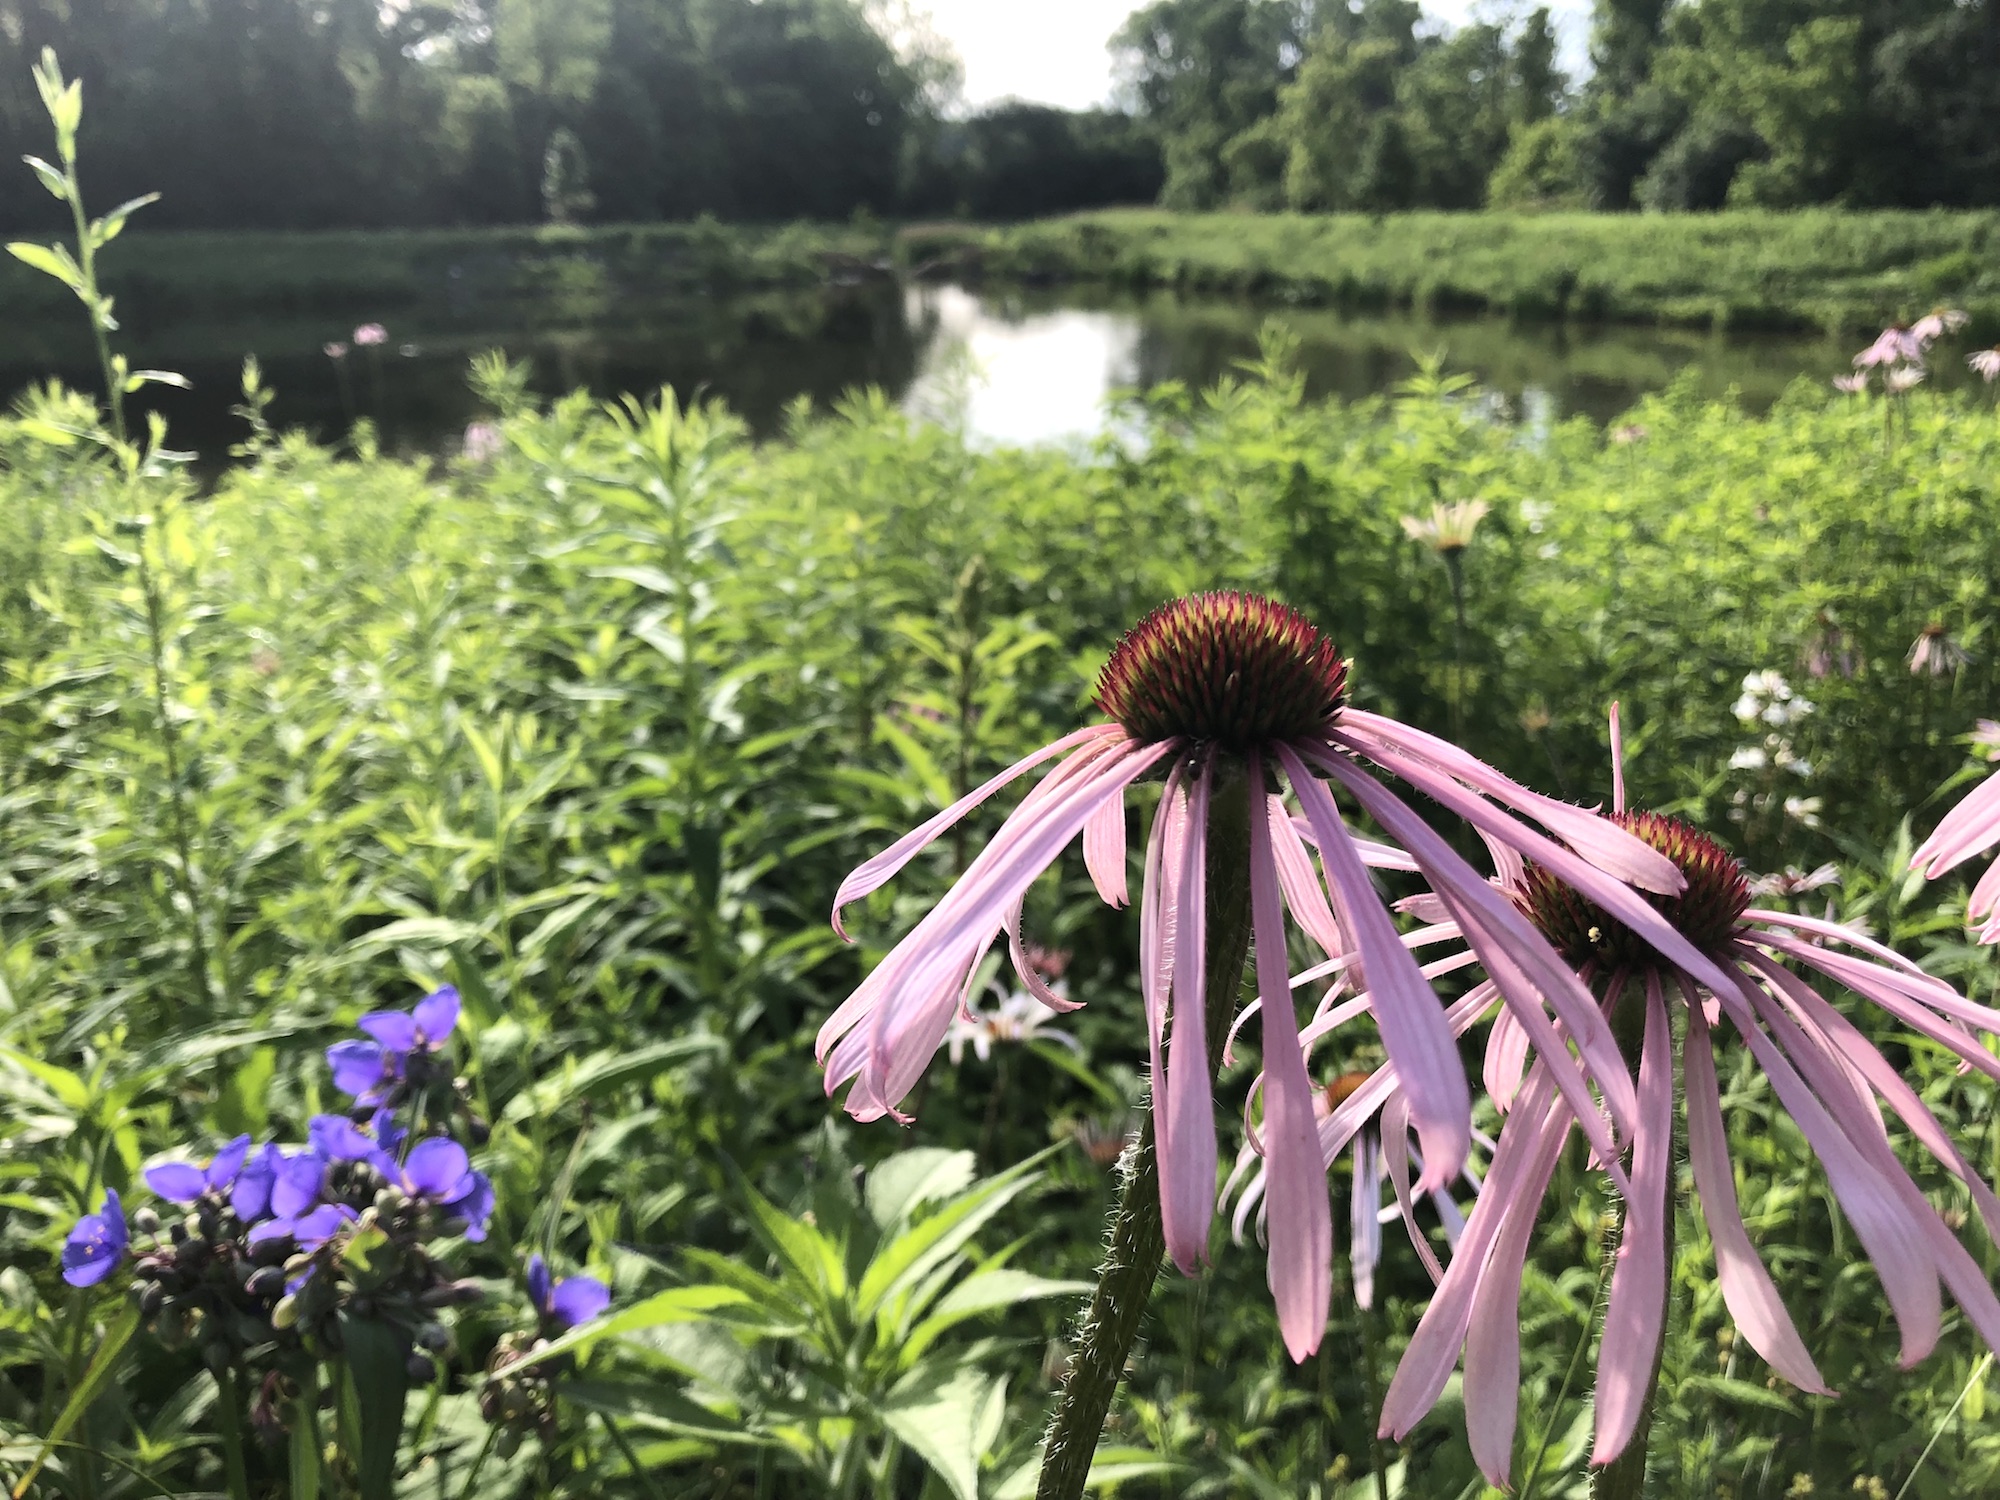 Pale purple coneflower on bank of Retaining Pond on corner of Nakoma Road and Manitou Way on June 26, 2019.